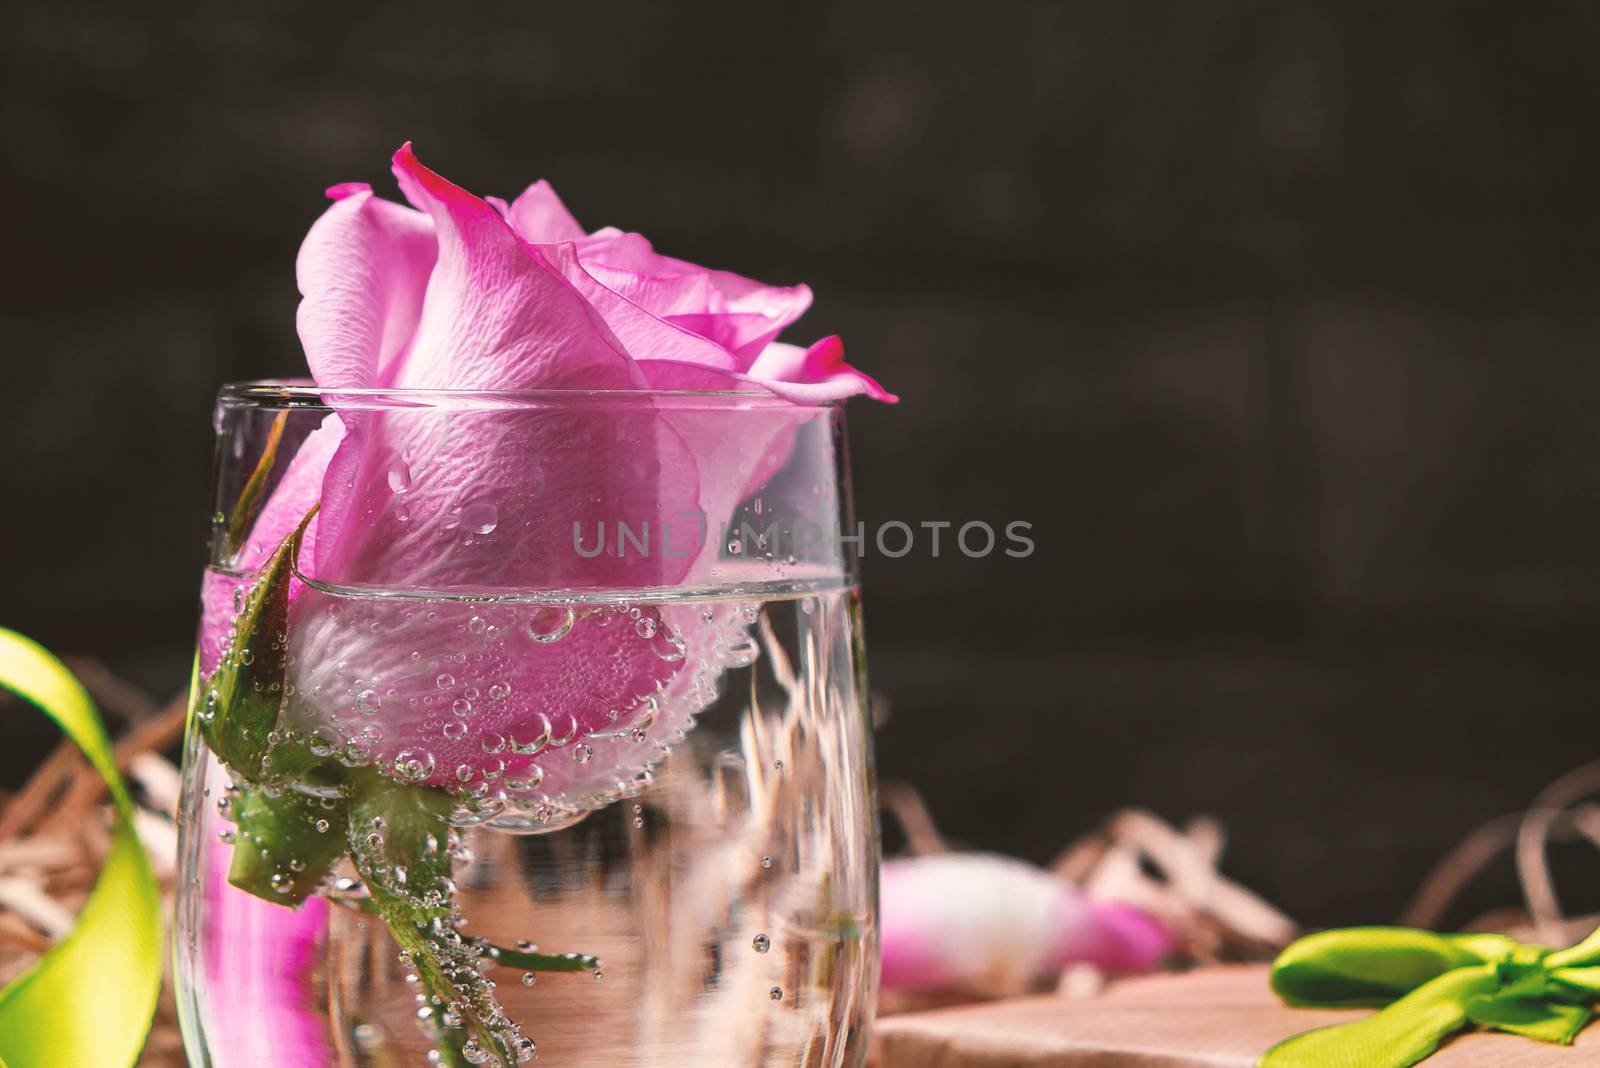 Pink rose in a glass with water and decorations on the table by galsand